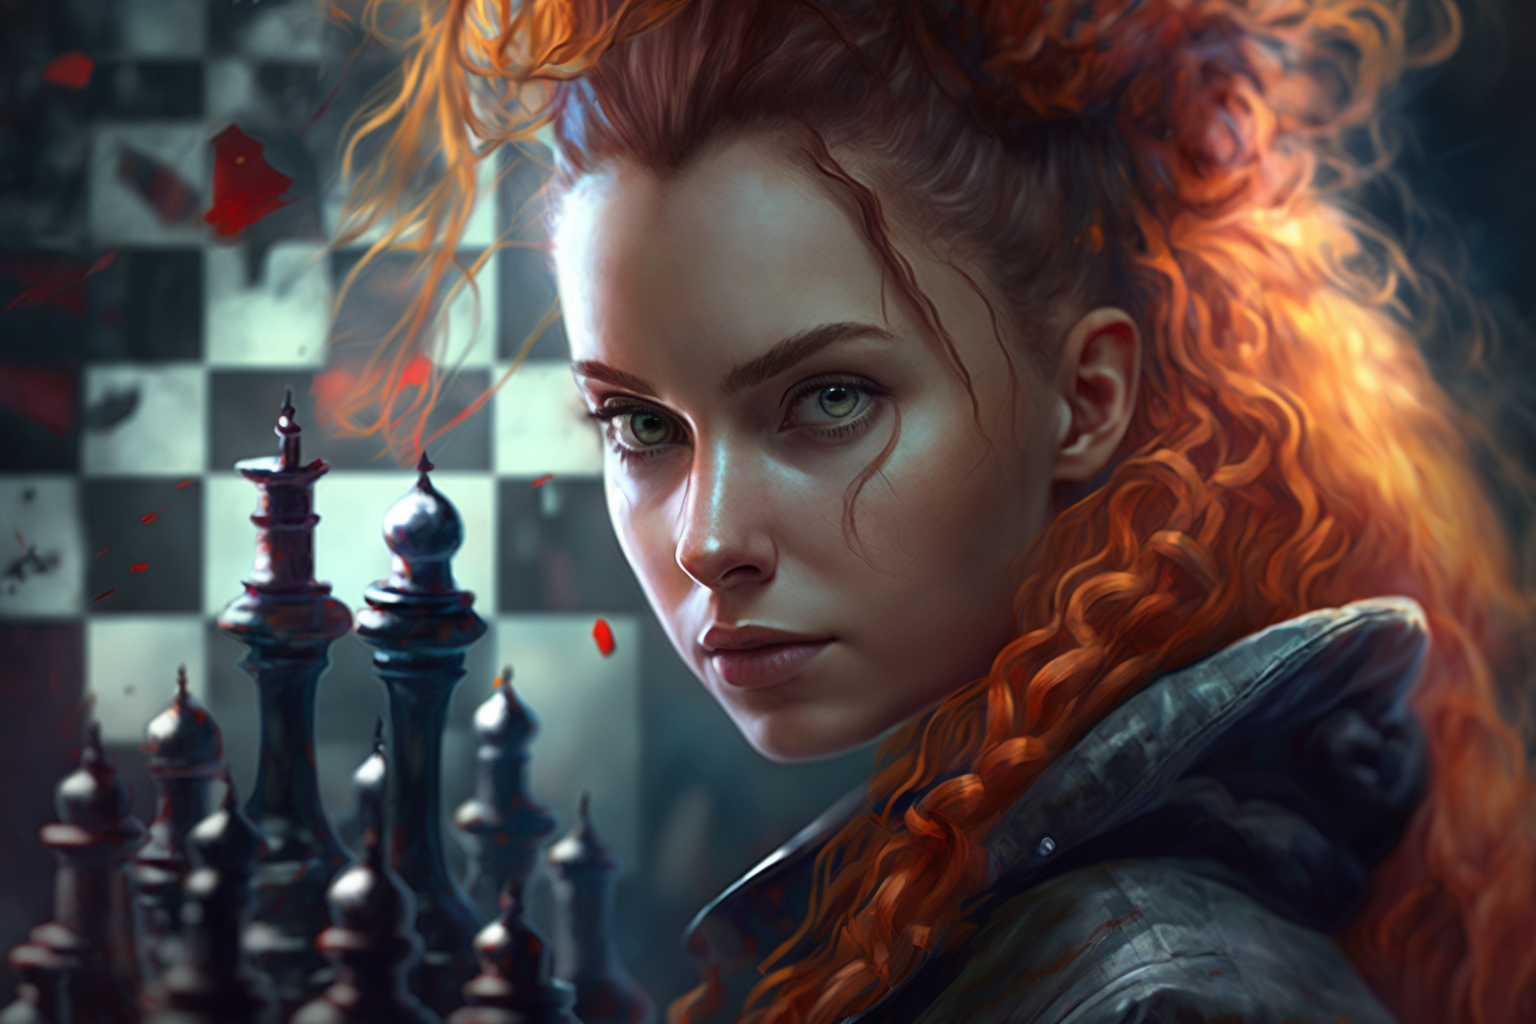 A fierce looking woman stands in front of a chess board